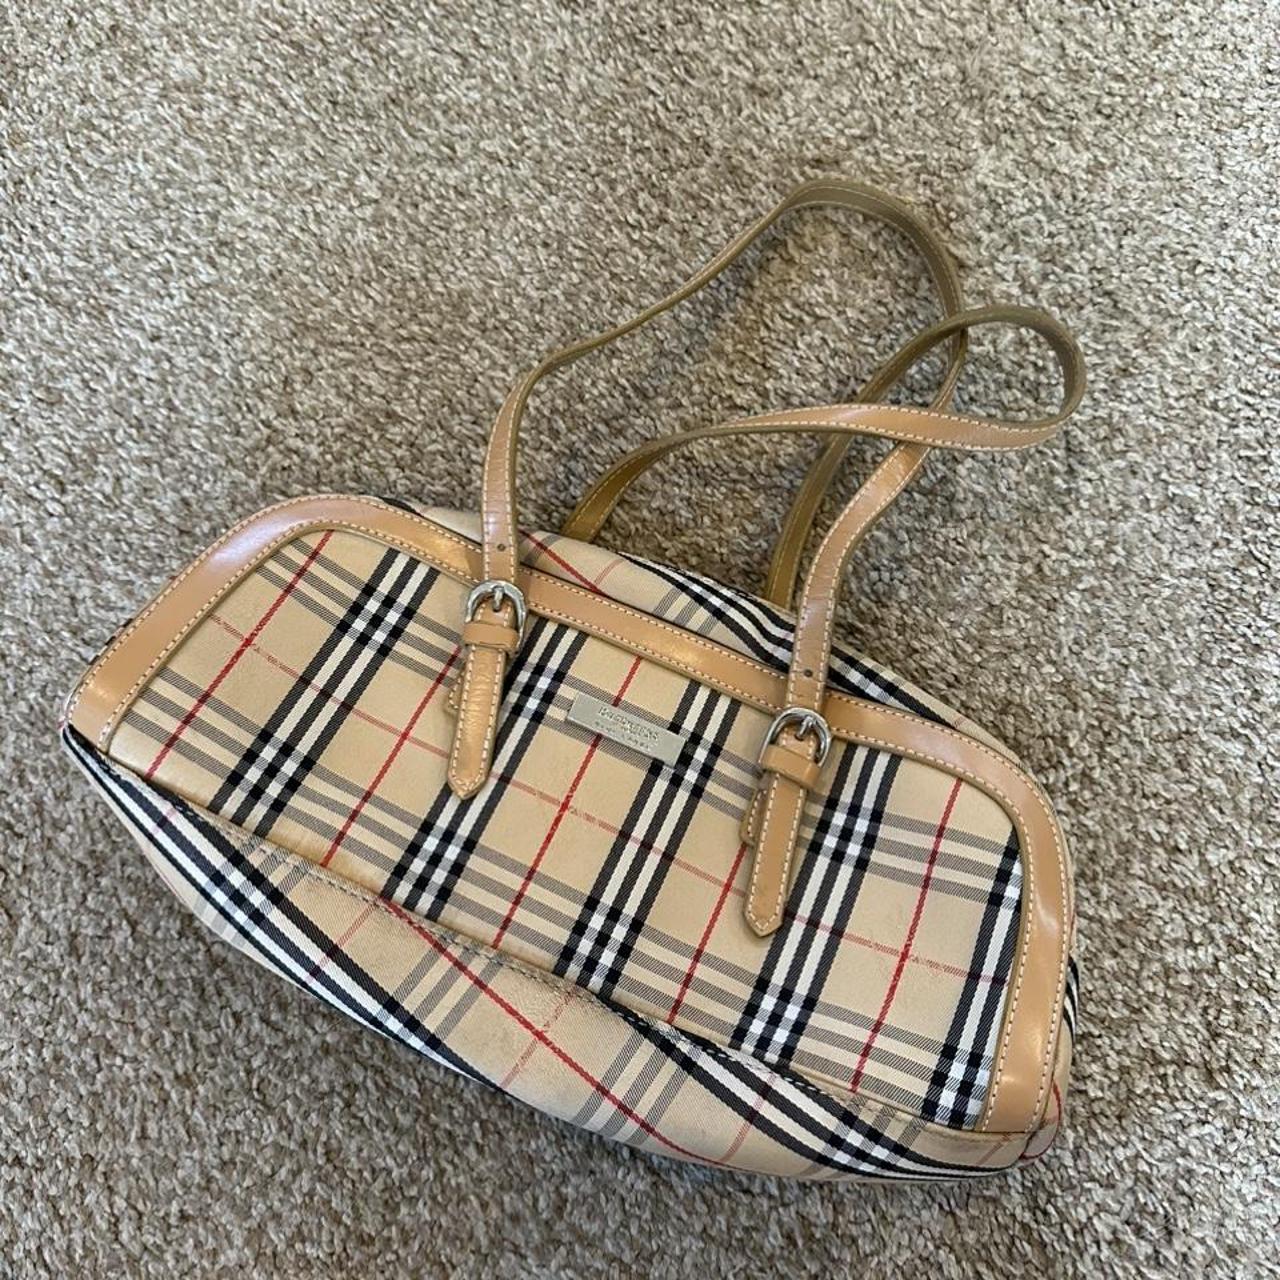 Authentic Burberry purse. In perfect condition other - Depop